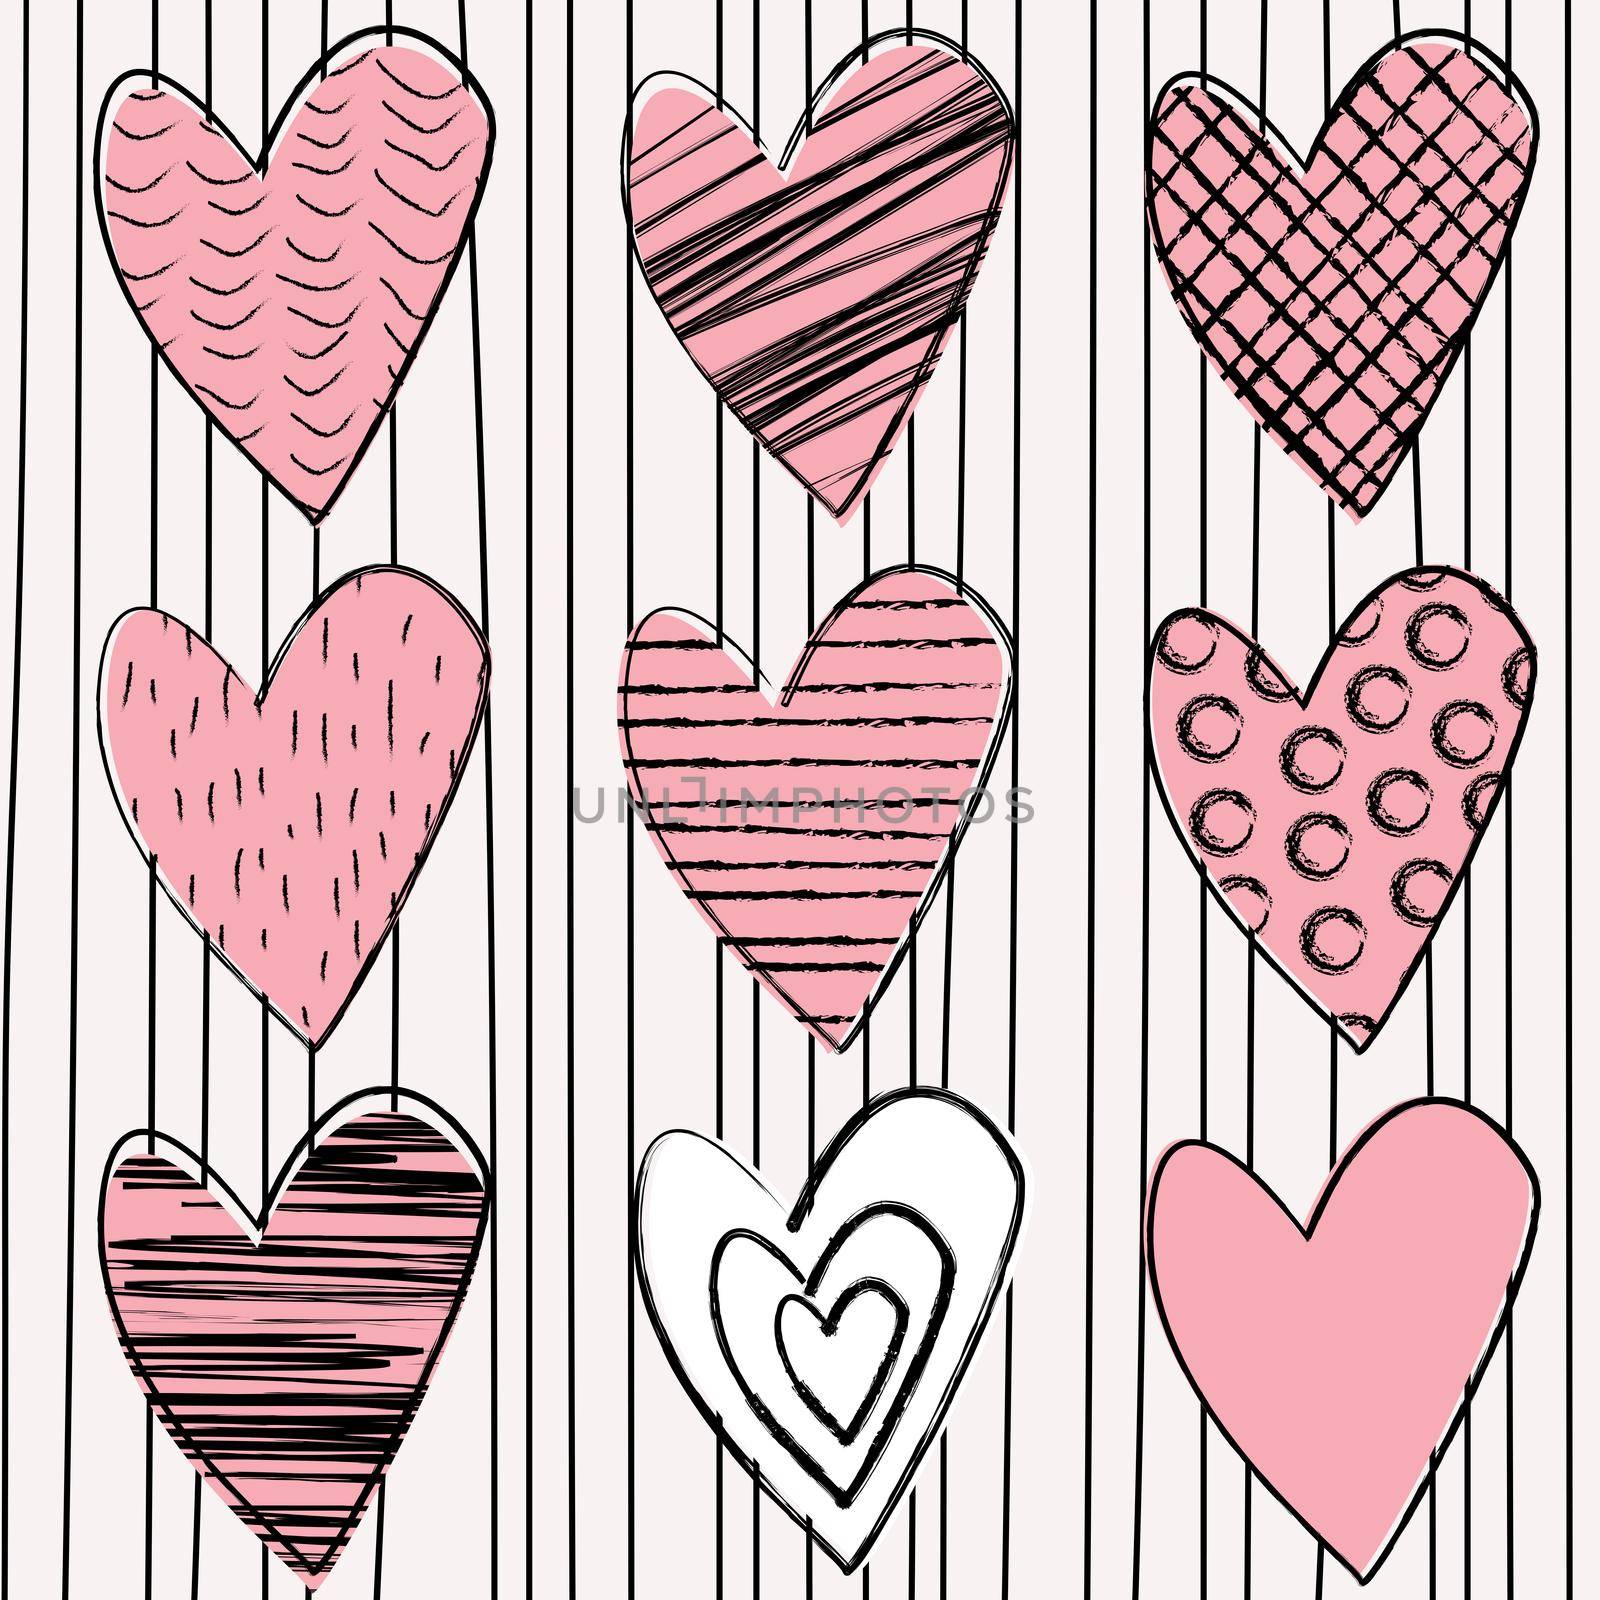 Set of doodle hearts on striped background by hibrida13